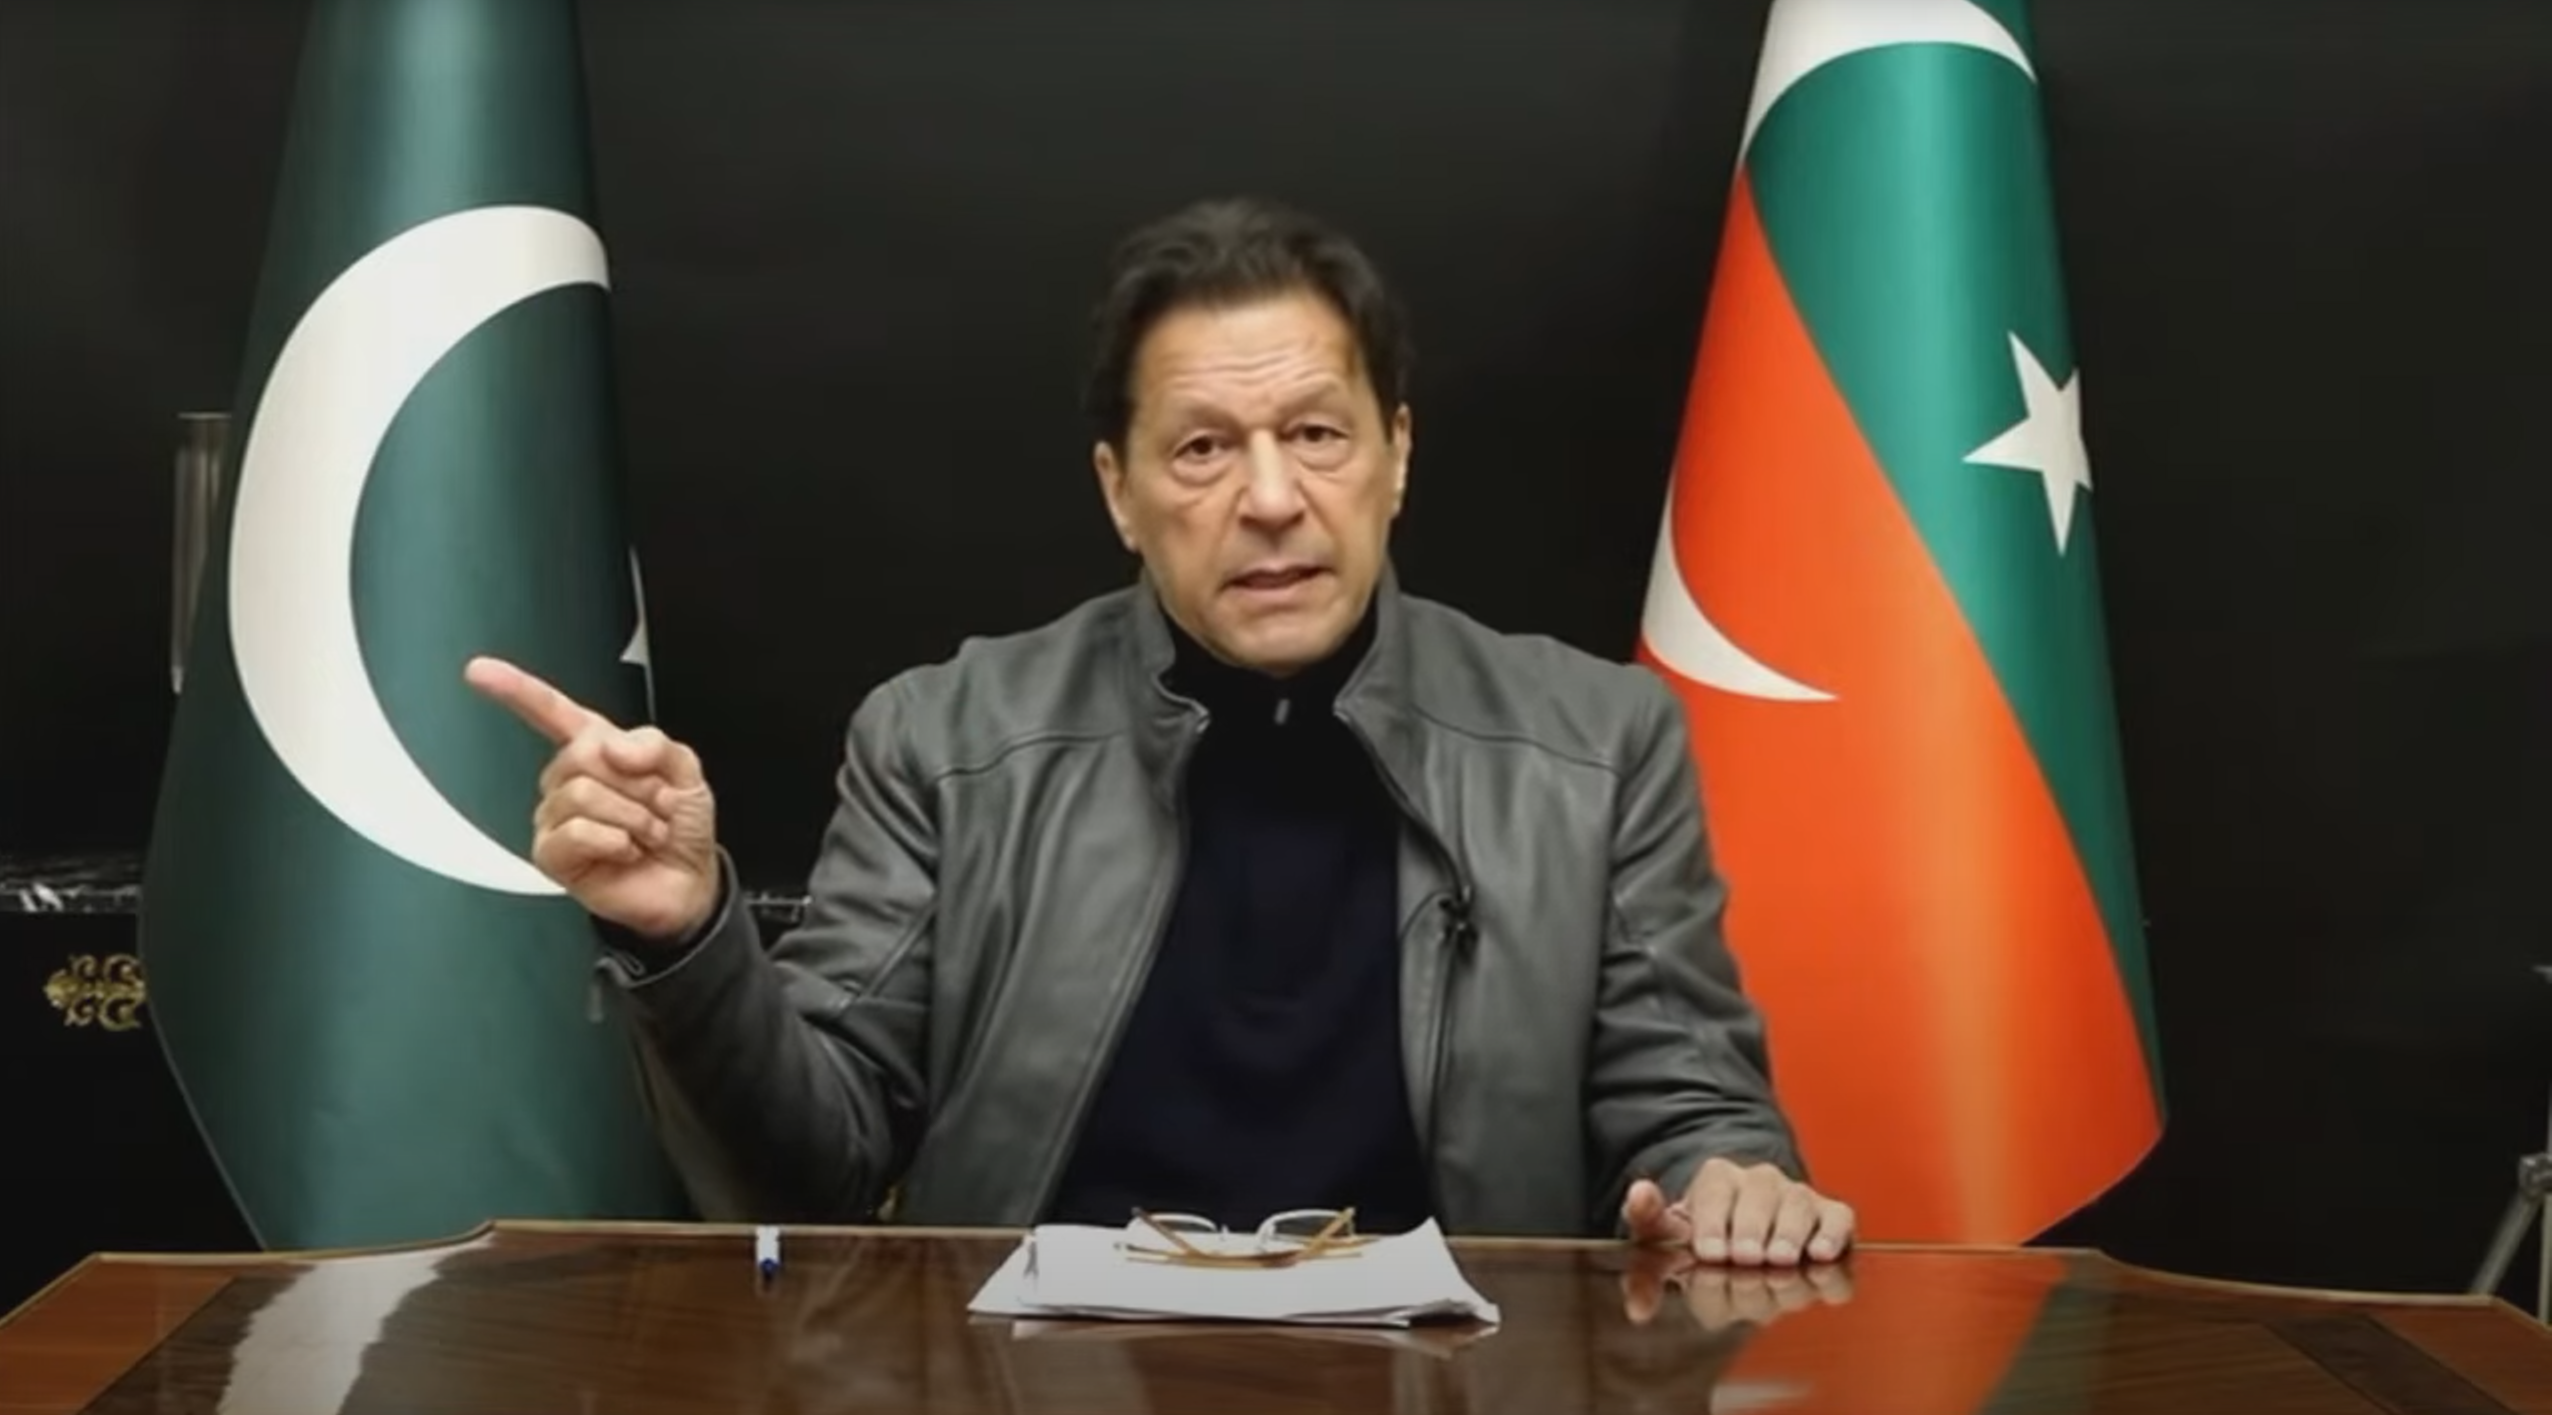 former prime minister imran khan addressing a press conference in lahore on january 25 2023 screengrab